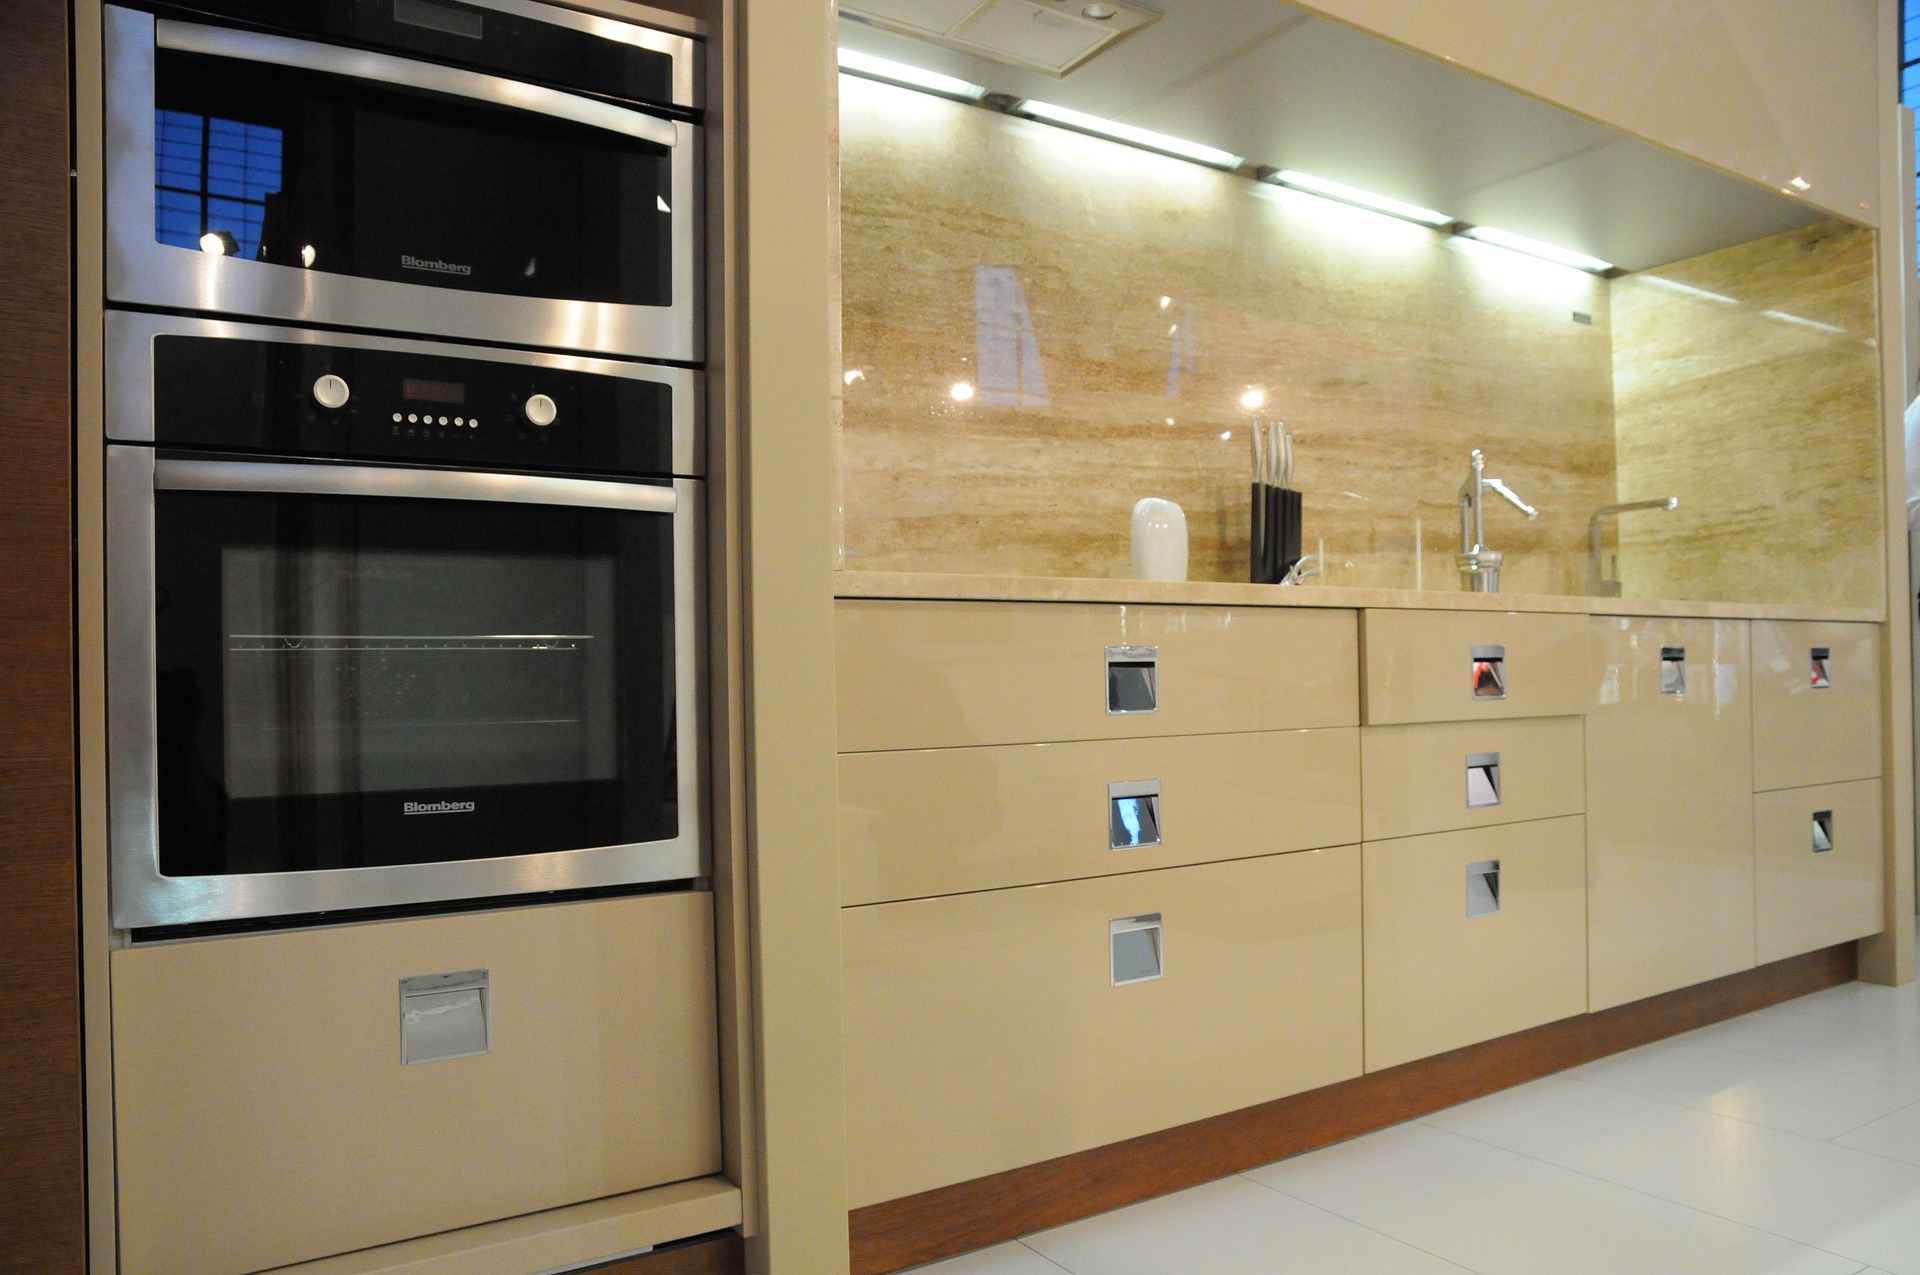 what makes modular kitchen designs so popular among the homemakers?